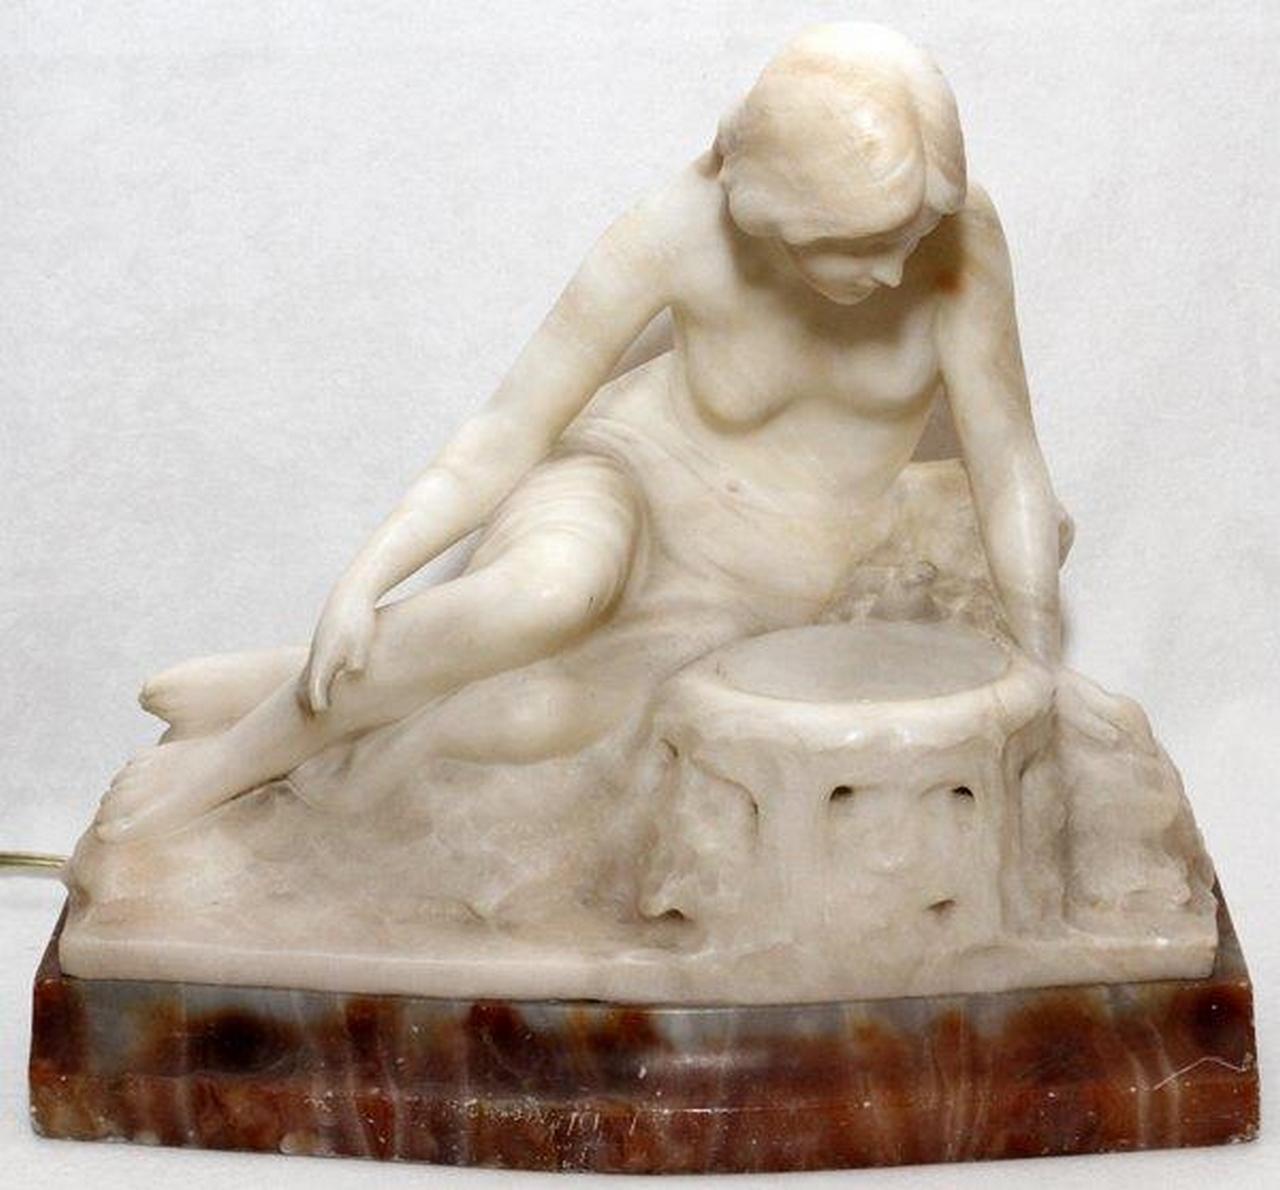 The Following Item is a Museum Quality Original Beautiful Italian White Marble and Alabaster Lamp Sculpture of a Figural Nude Woman Sitting on a Rock by Artist Ferdinando Vichi (1875-1925), Circa 1895. Signed F. Vichi Made in Italy. 
Measurements: